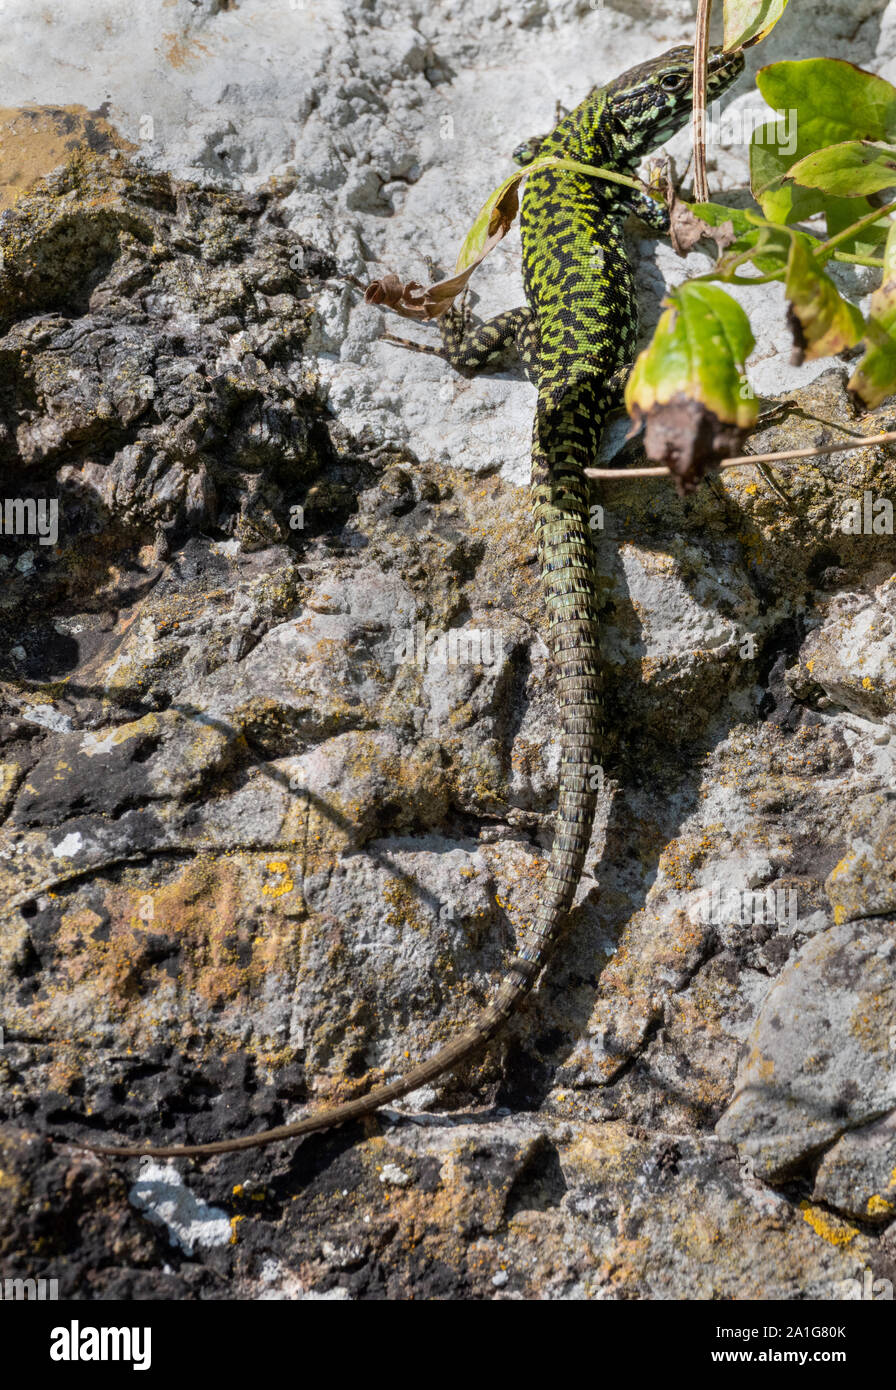 Mature male wall lizard Podarcis muralis in the Avon Gorge Bristol UK showing length of tail in relation to overall length Stock Photo